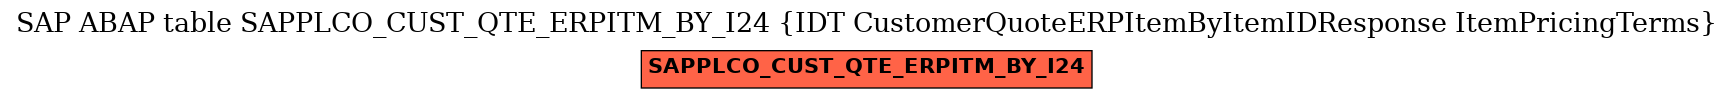 E-R Diagram for table SAPPLCO_CUST_QTE_ERPITM_BY_I24 (IDT CustomerQuoteERPItemByItemIDResponse ItemPricingTerms)